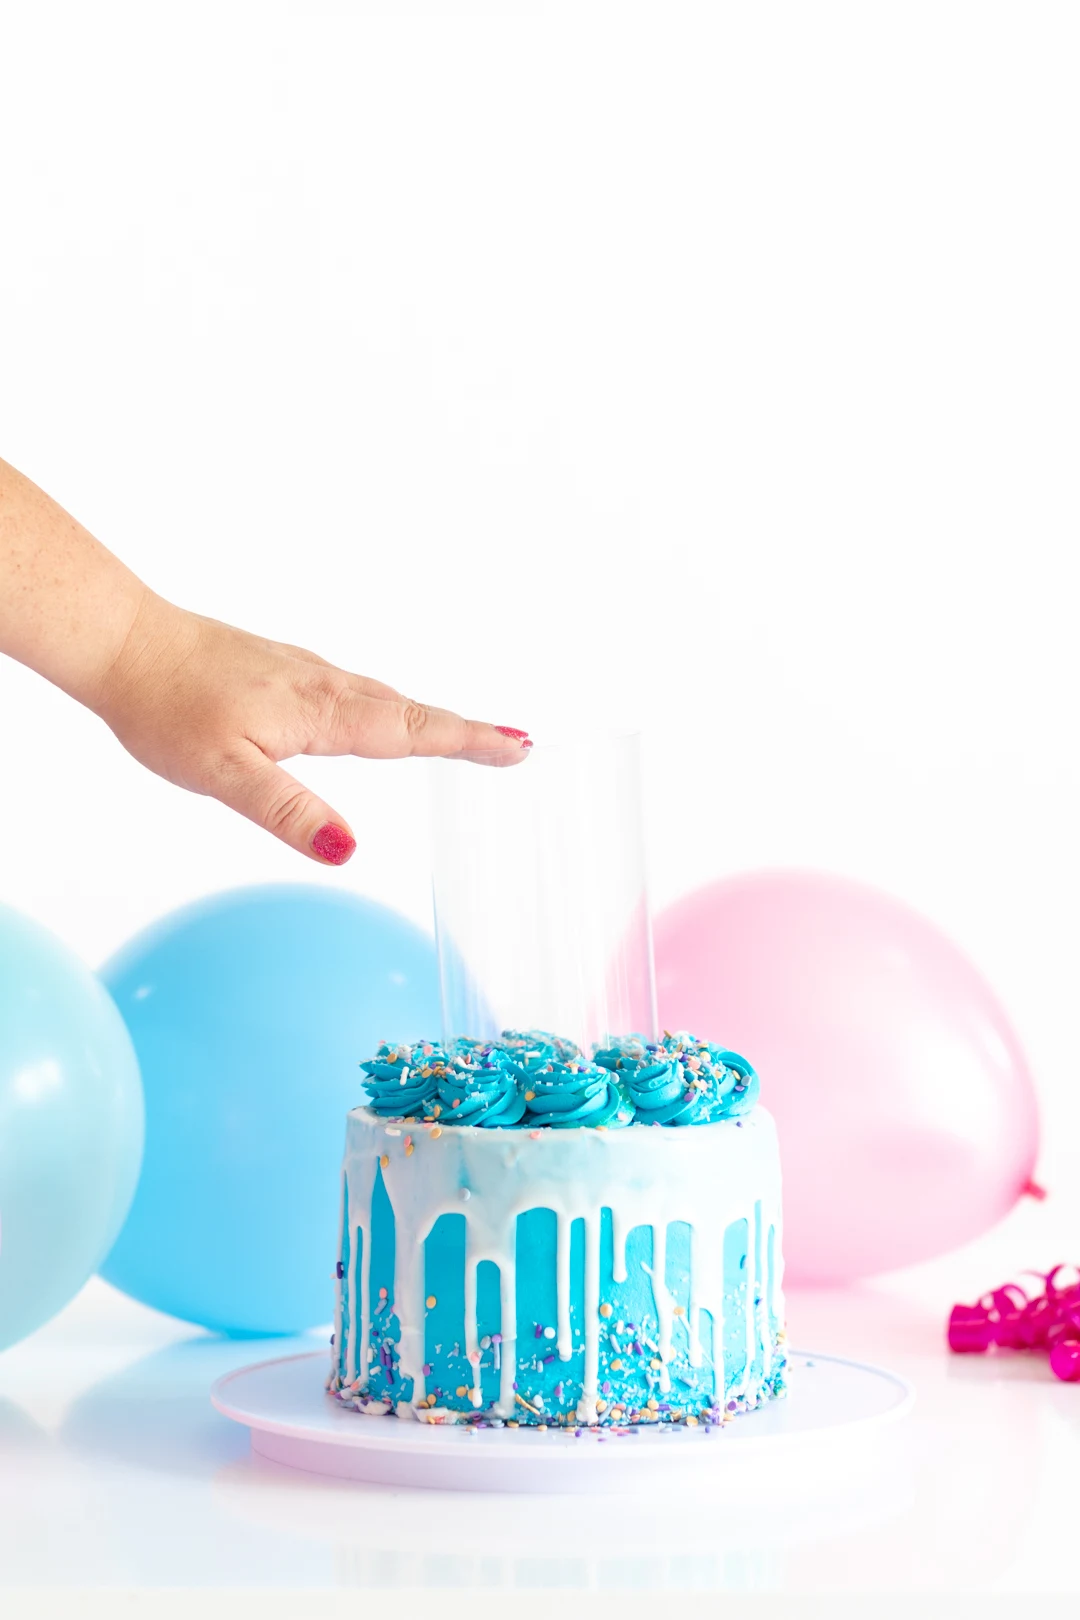 pressing a clear tube into the center of a small blue cake to remove the center to enable it to be used in a surprise cake stand